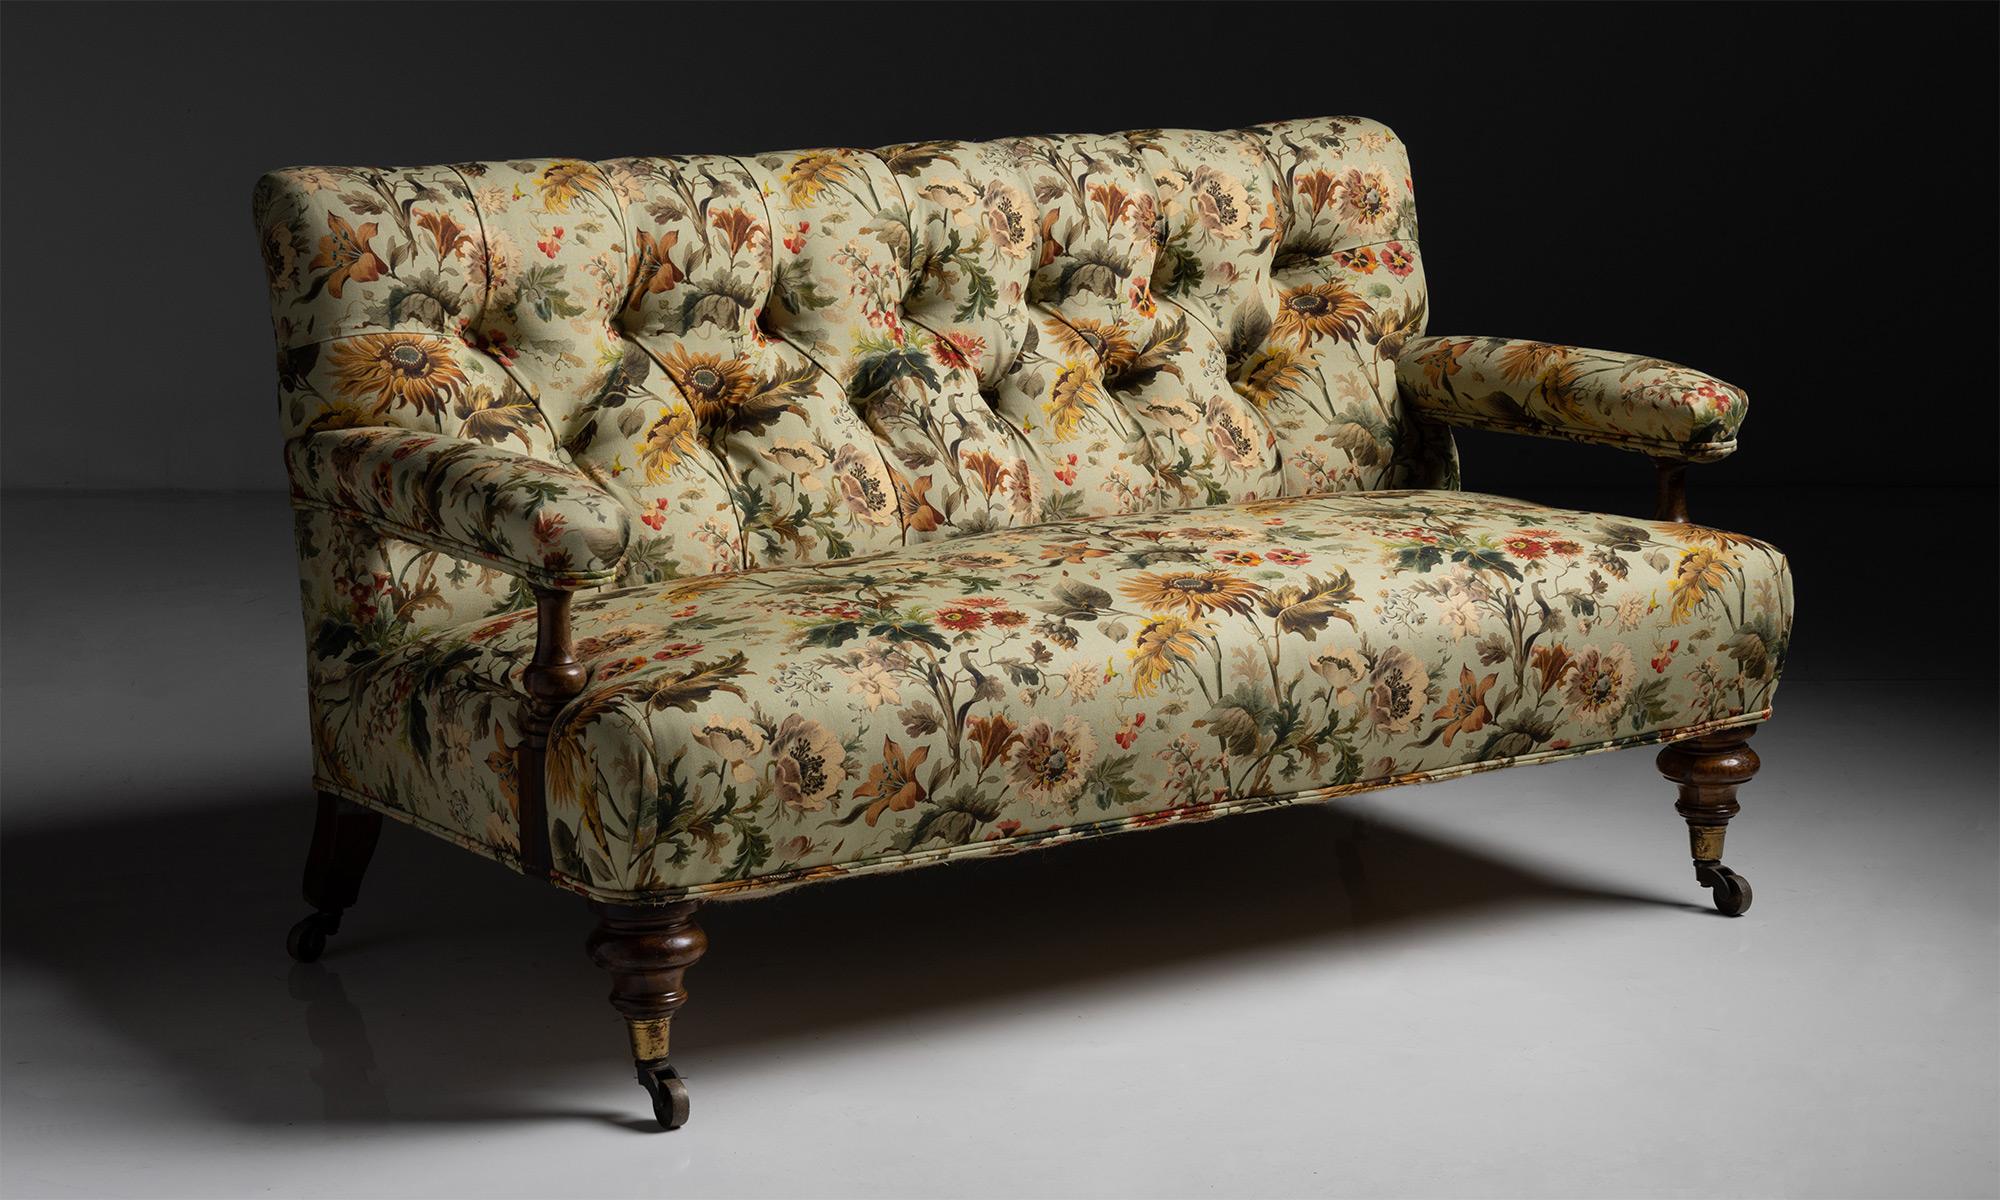 59 Inch long button back sofa in linen blend by House of Hackney

England, circa 1880.

Open arm button back sofa recently upholstered in floral linen and cotton blend by House of Hackney

Measures: 59”L x 32”D x 32.5”H x 18”seat.